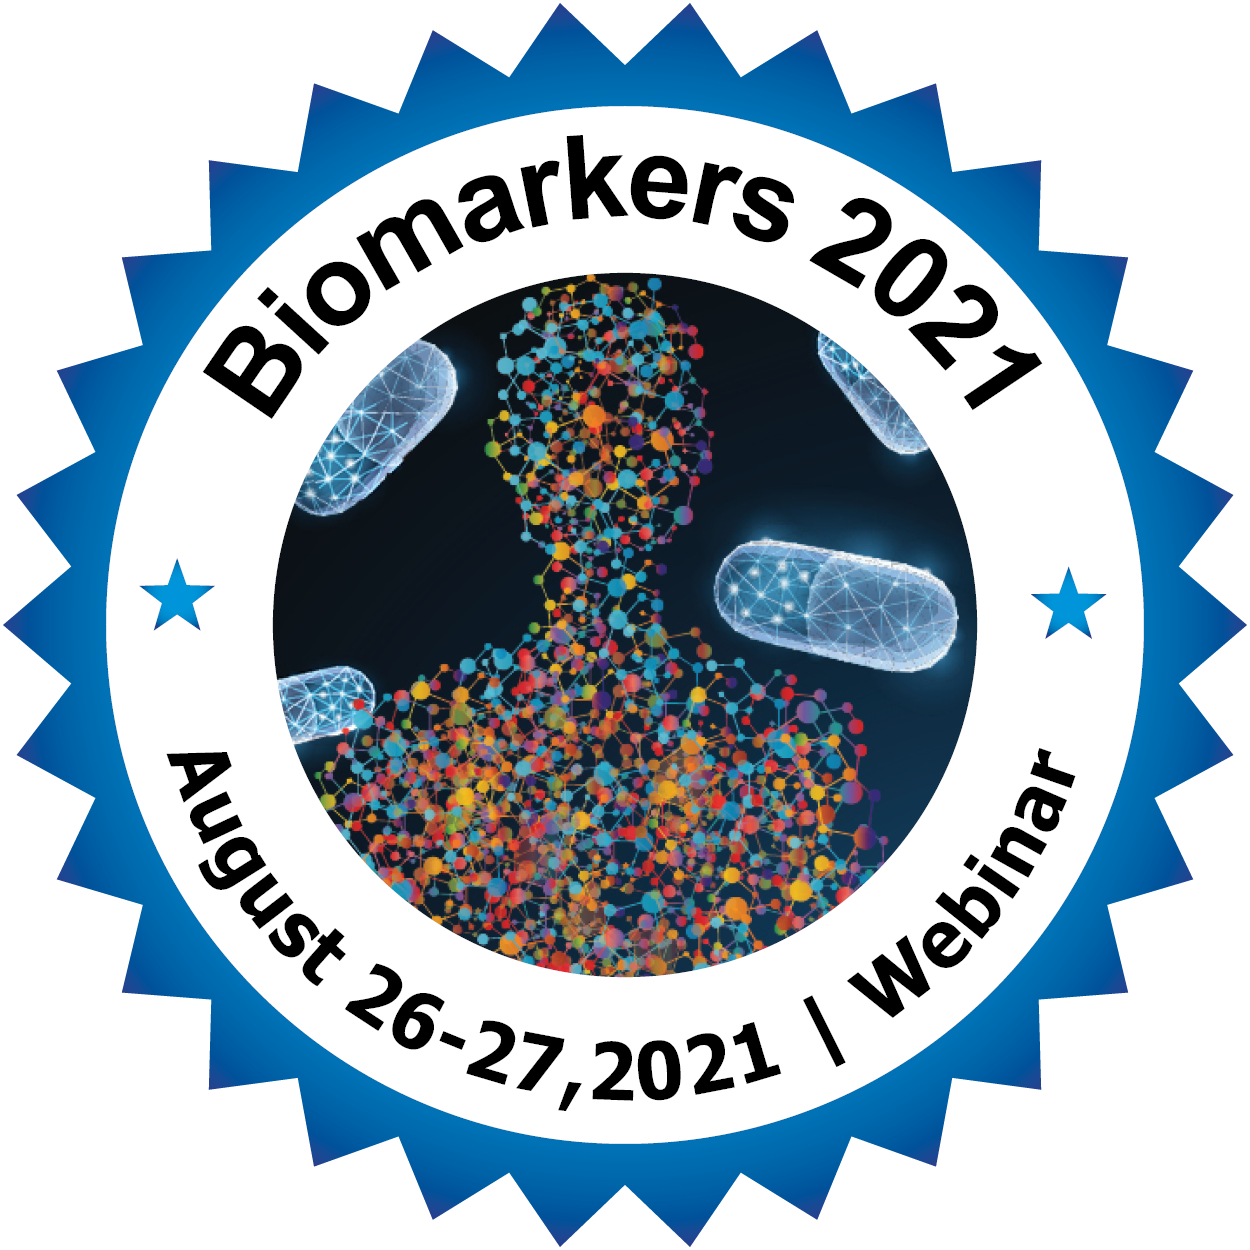 Registration Biomarkers Clinical Research Biomarkers Conference